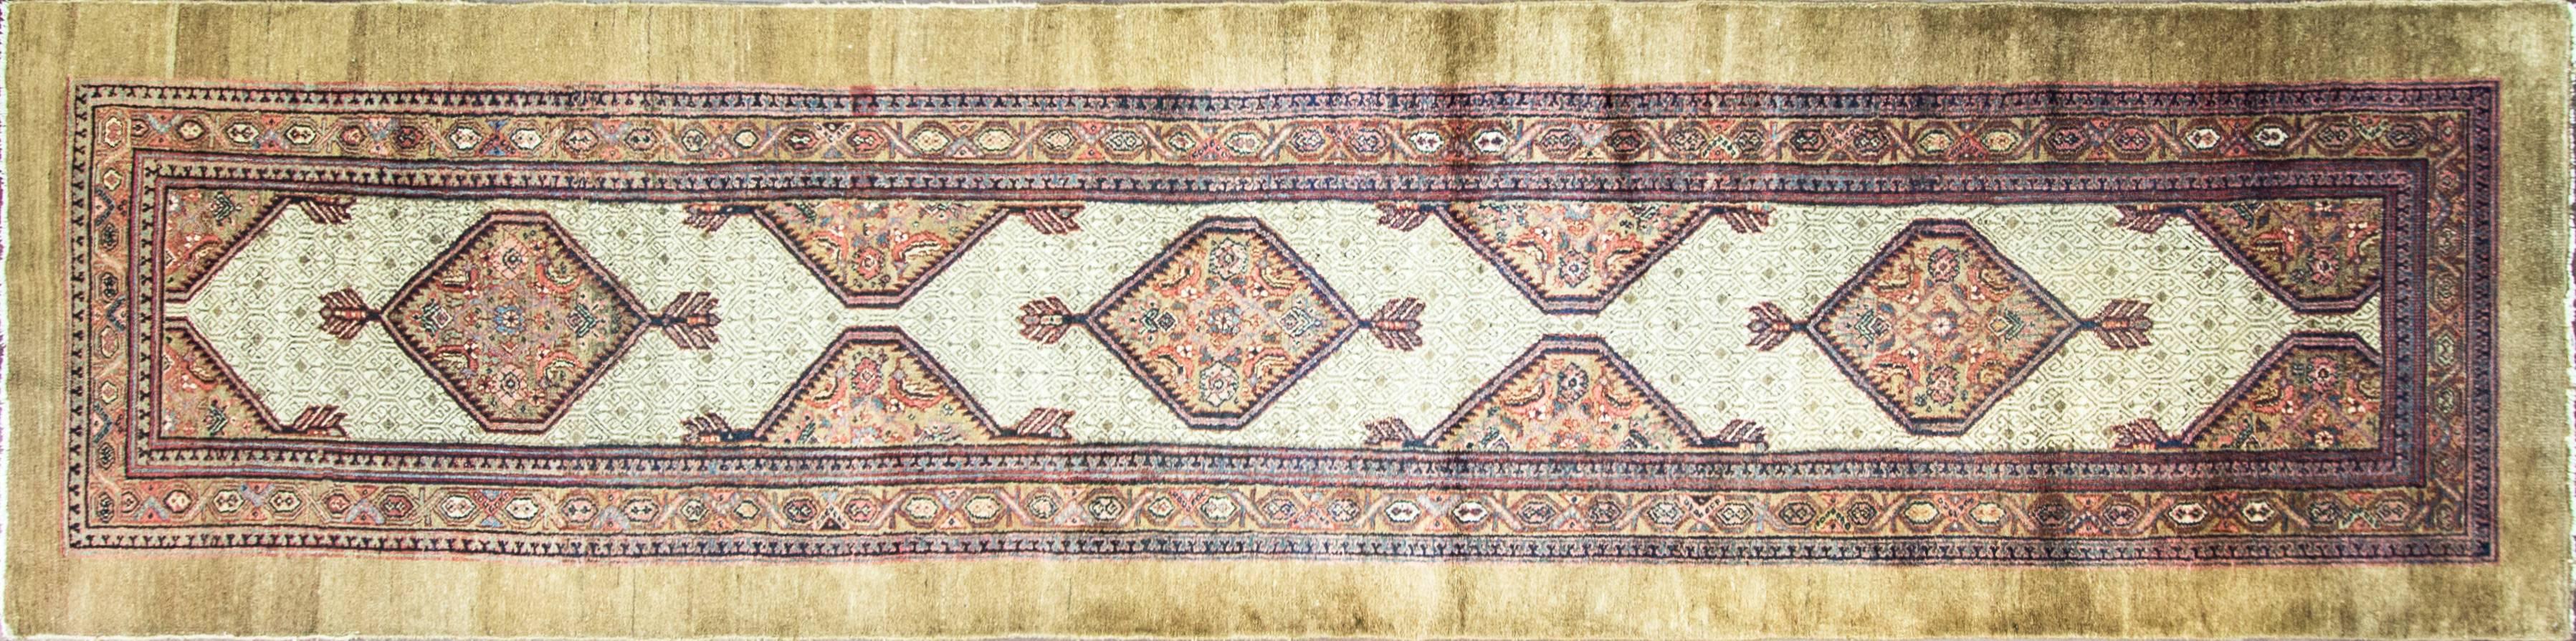 In the province of Azerbaijan in northwestern Iran, the village of Sarab served as the name source for antique Sarab rugs and it is located in northwest Iran in the province of Azerbaijan and they known for their Fine long rugs or runners with a